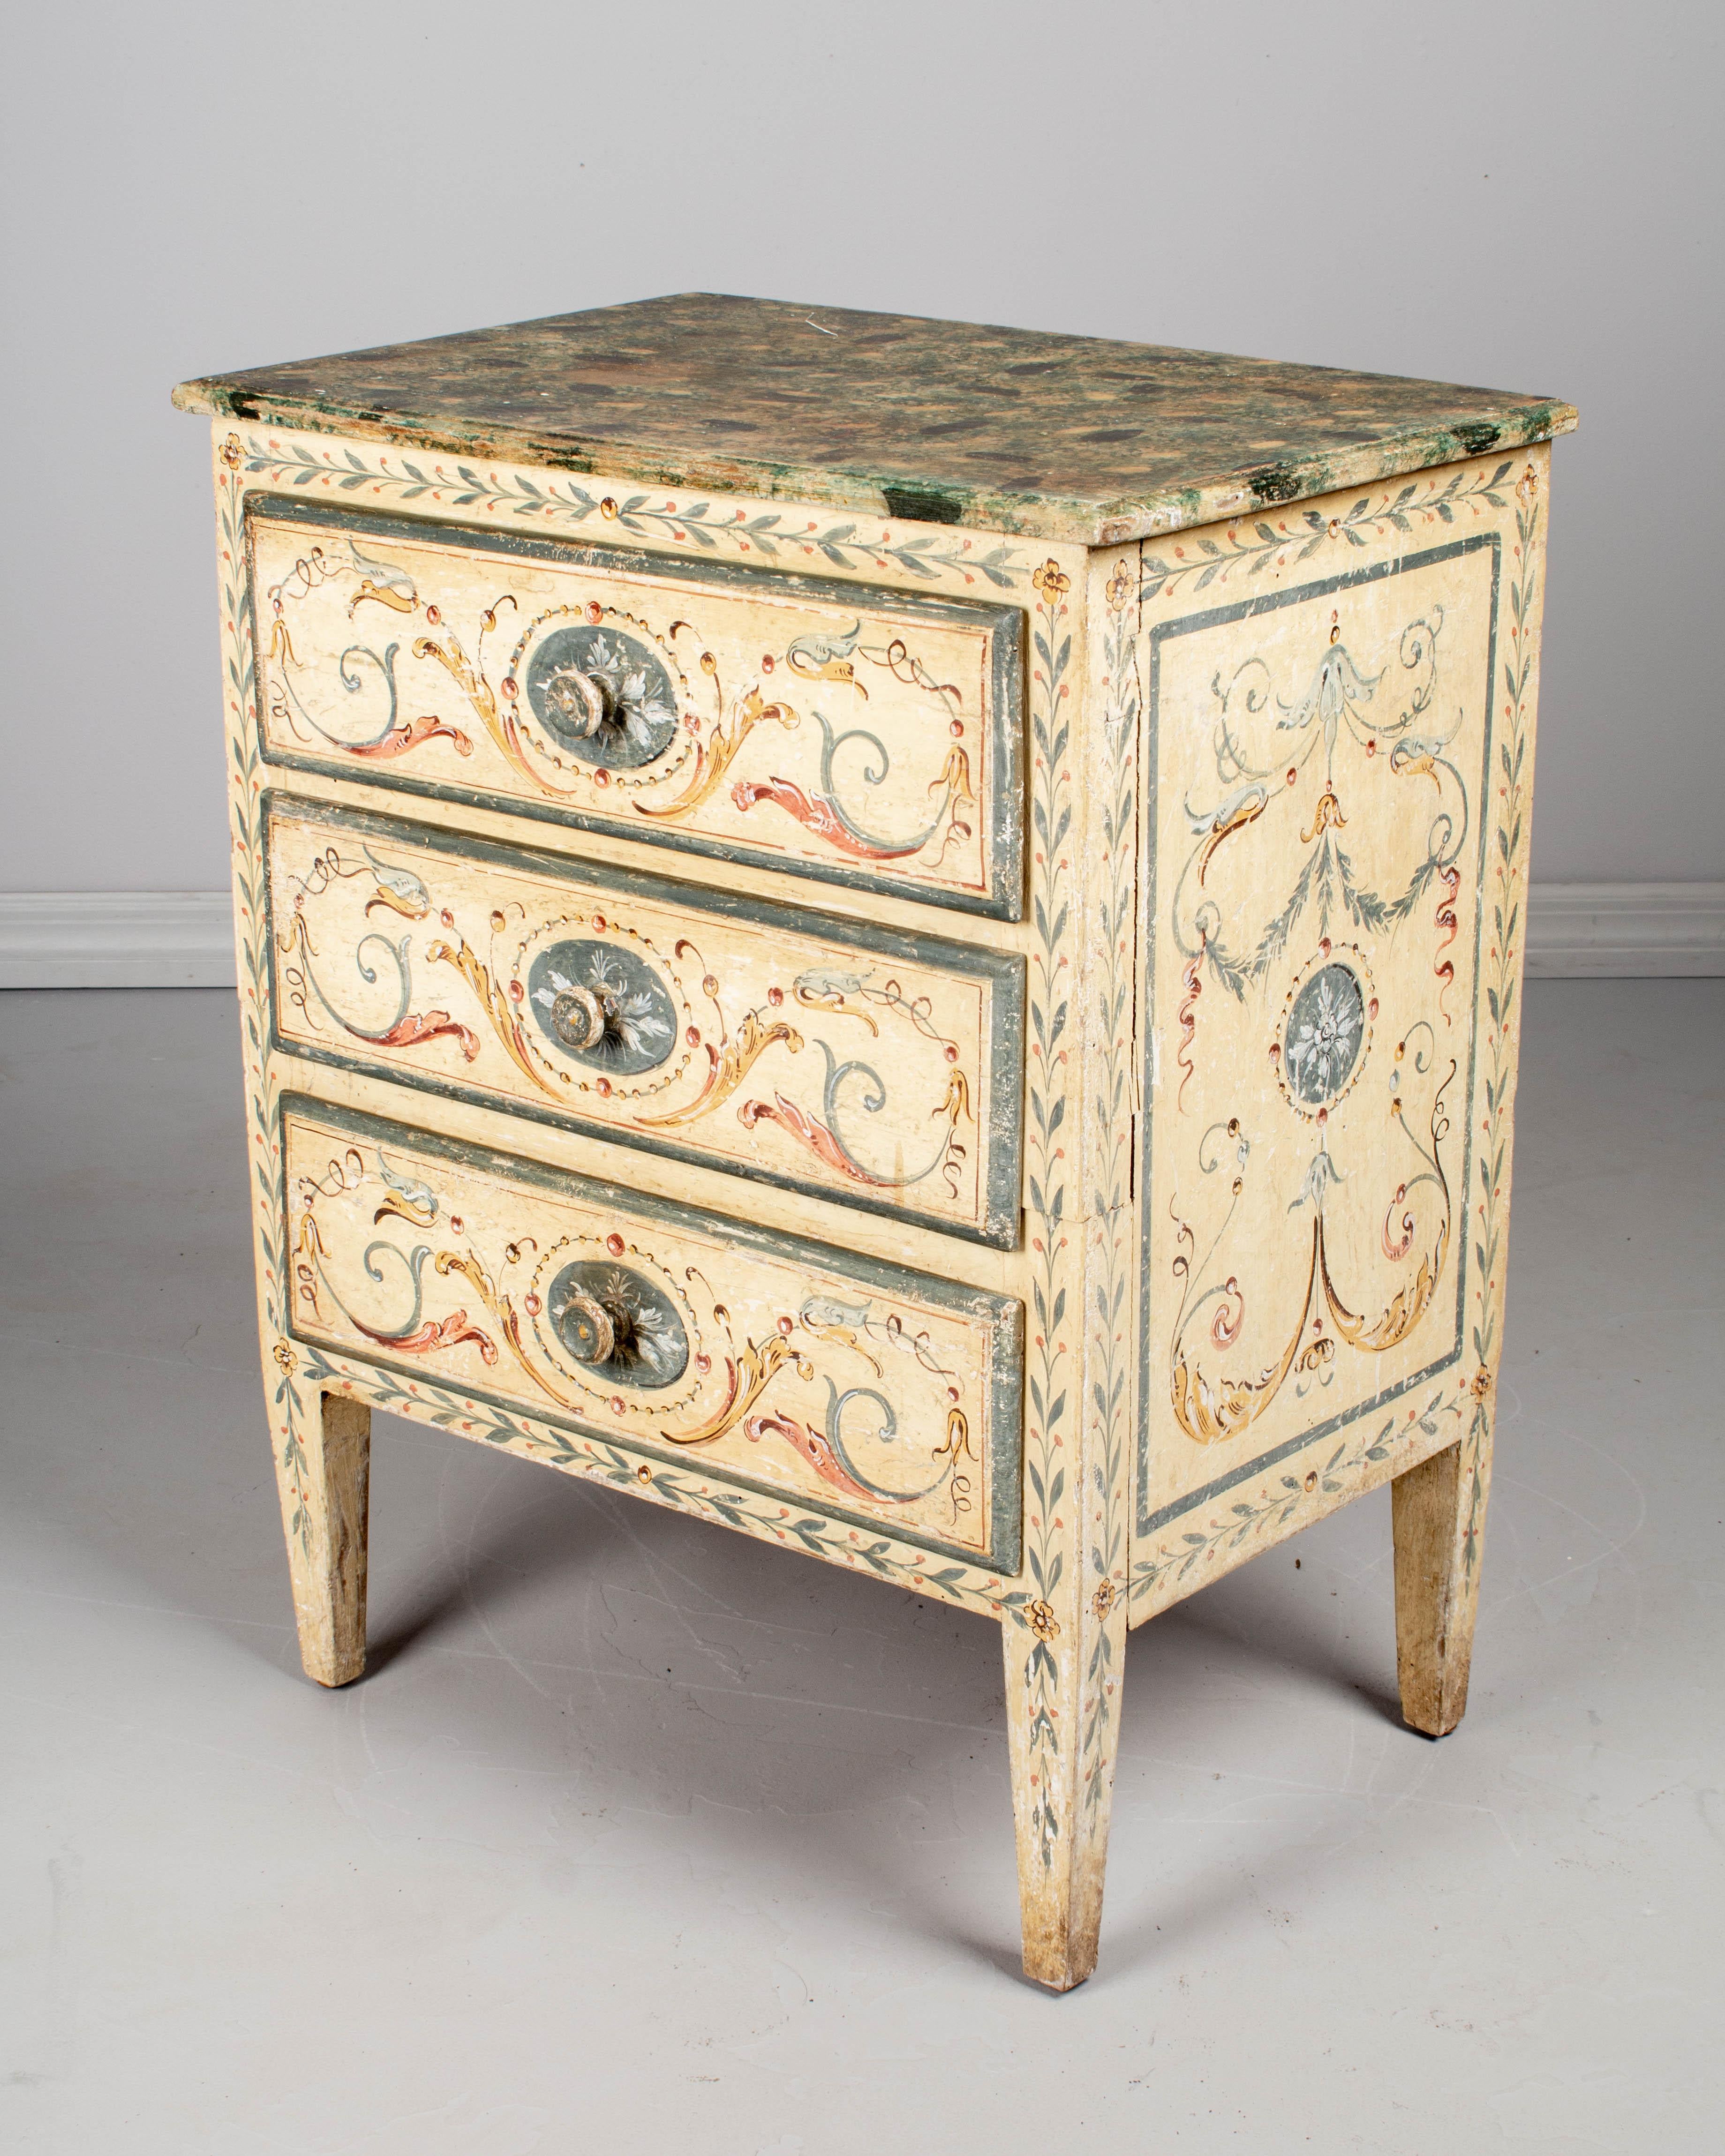 A small Italian Florentine style paint decorated chest, or nightstand. Made of pine, with three dovetailed drawers. Mid-19th century with later paint. In good condition, sturdy and well-crafted. Nice patina with minor paint loss. Please refer to